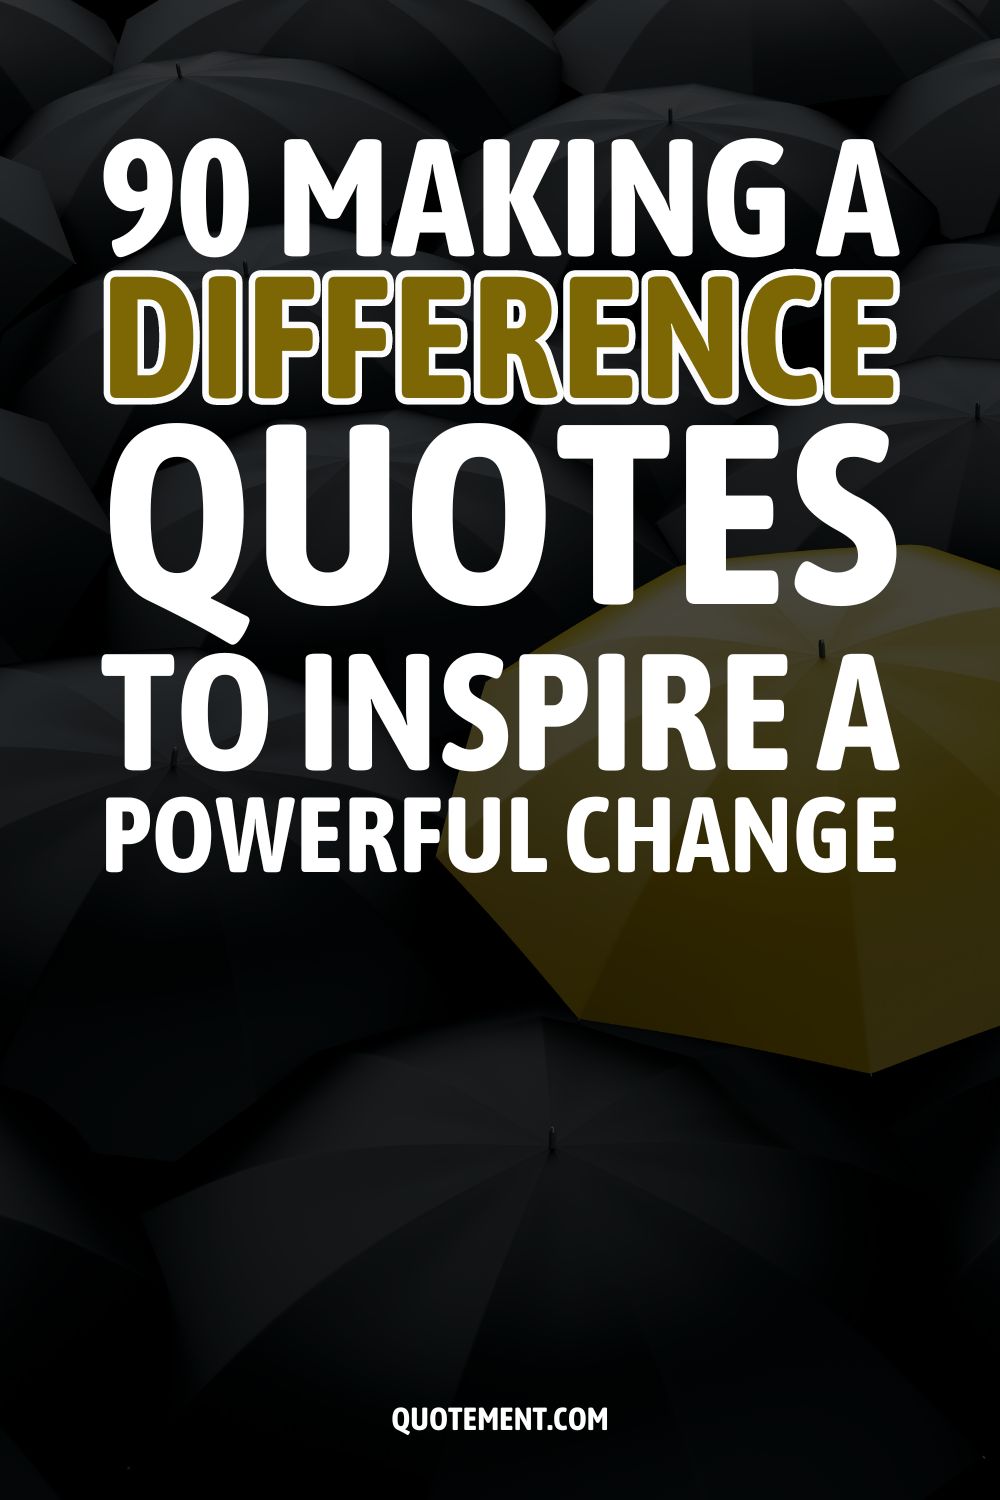 90 Making A Difference Quotes To Inspire A Powerful Change
